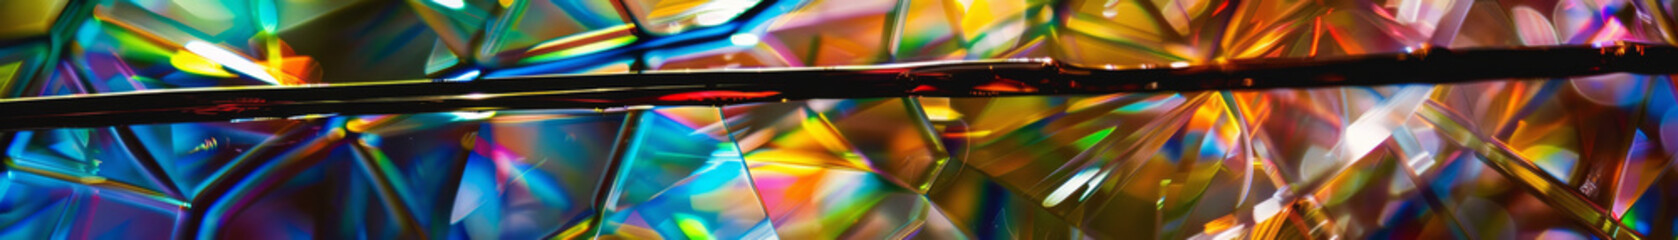 Colorful Glass Art Reflecting Light in Vivid Colors